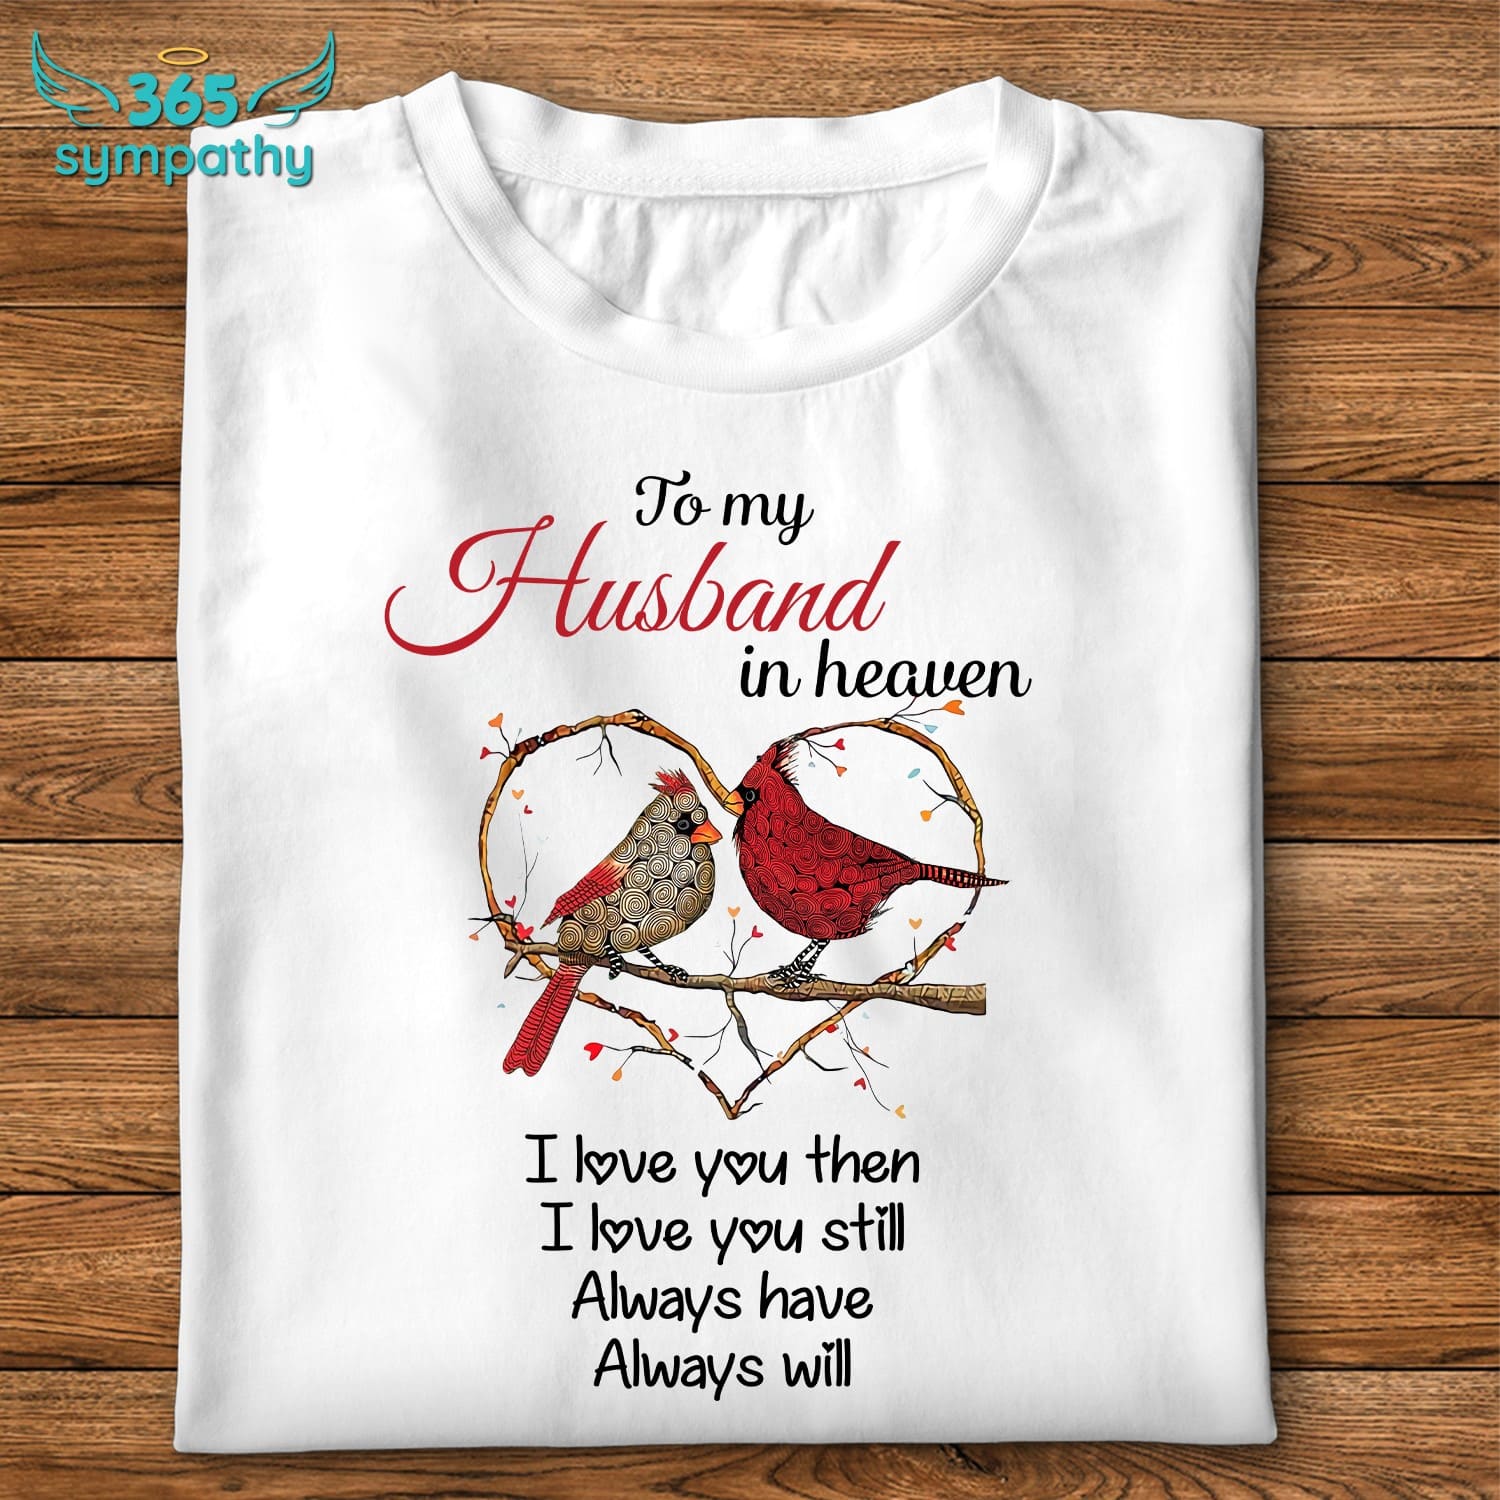 To my husband in heaven I love you then I love you still - Cardinal bird couple, gift for valentine